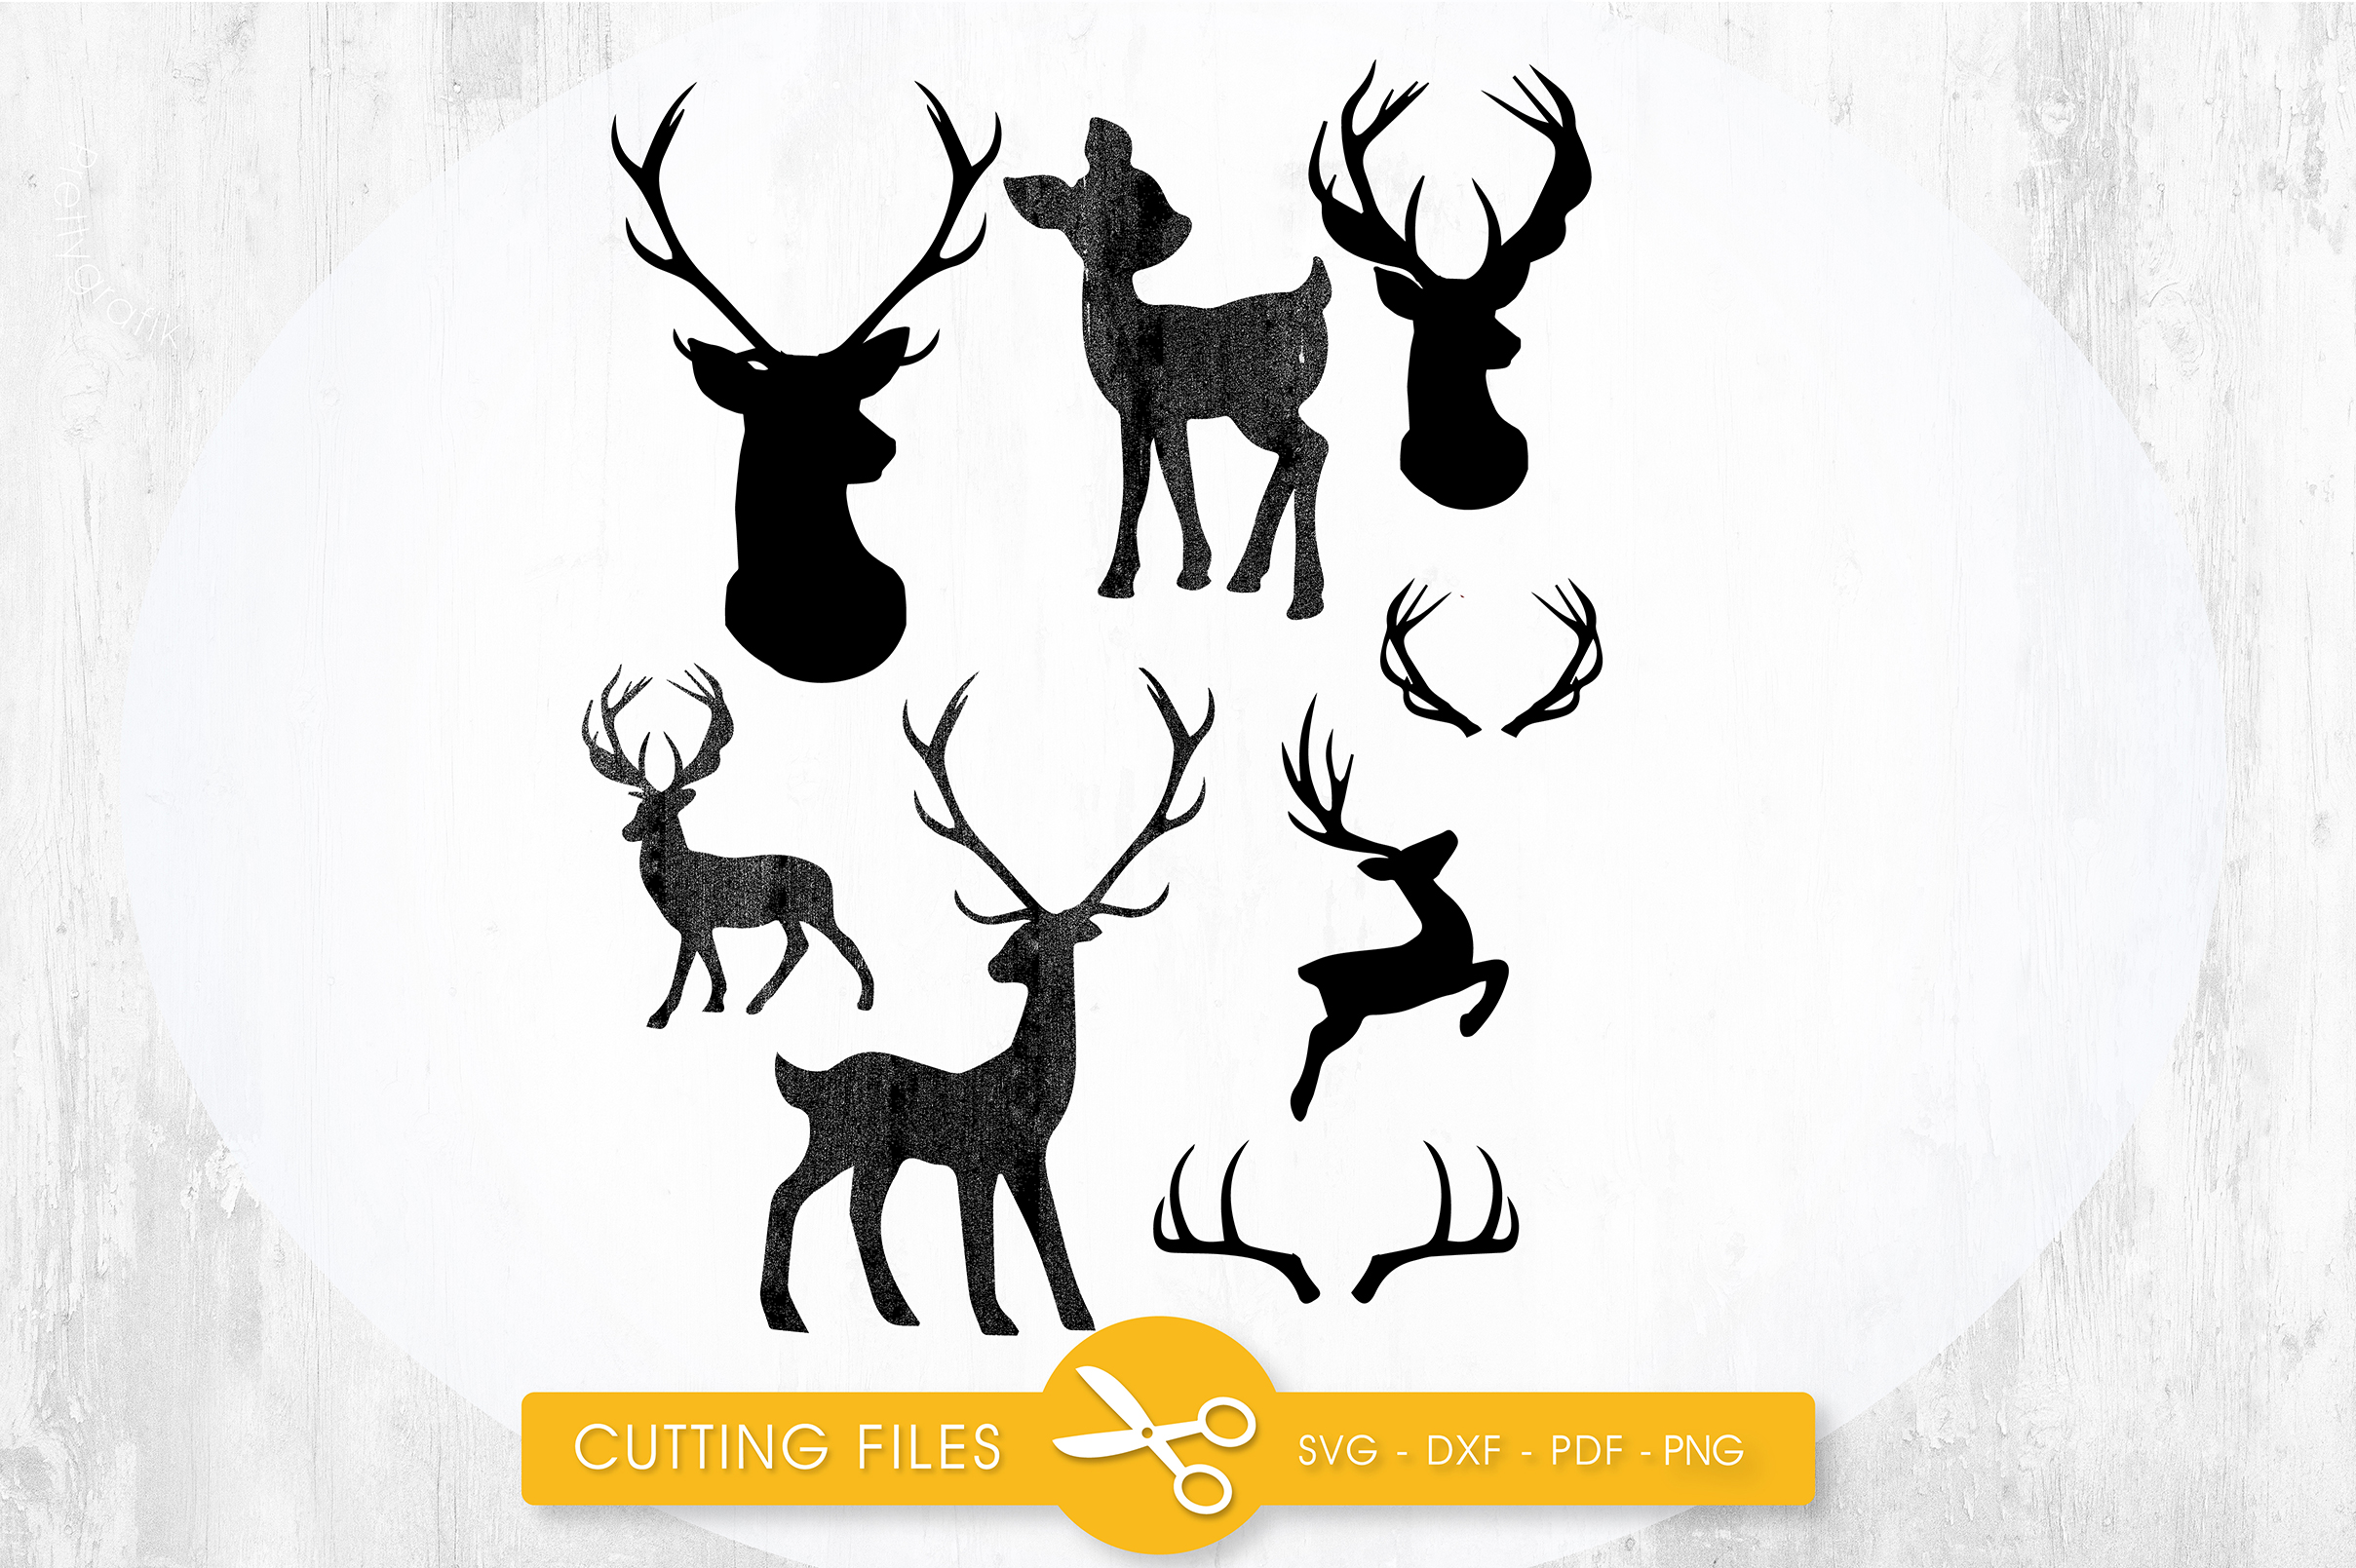 Deer Silhouettes cutting files svg, dxf, pdf, eps included ...